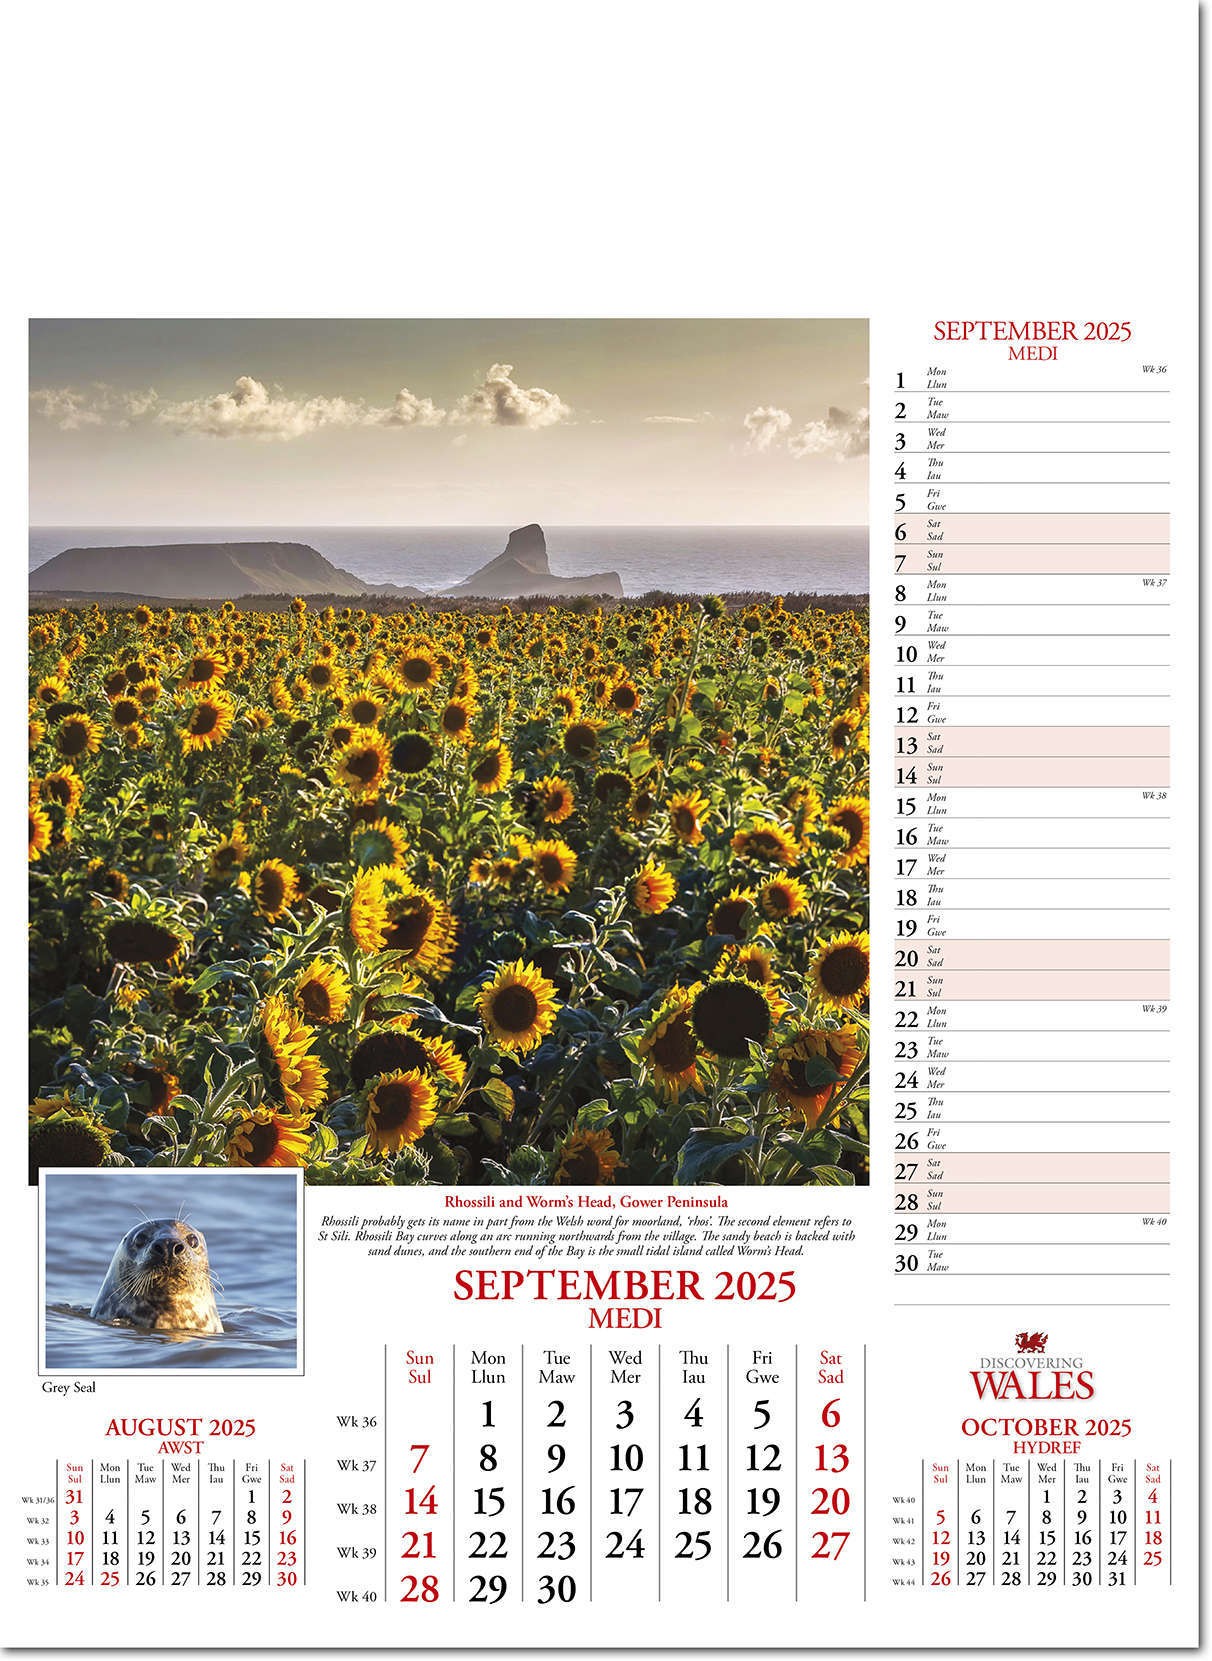 Discovering Wales Calendar